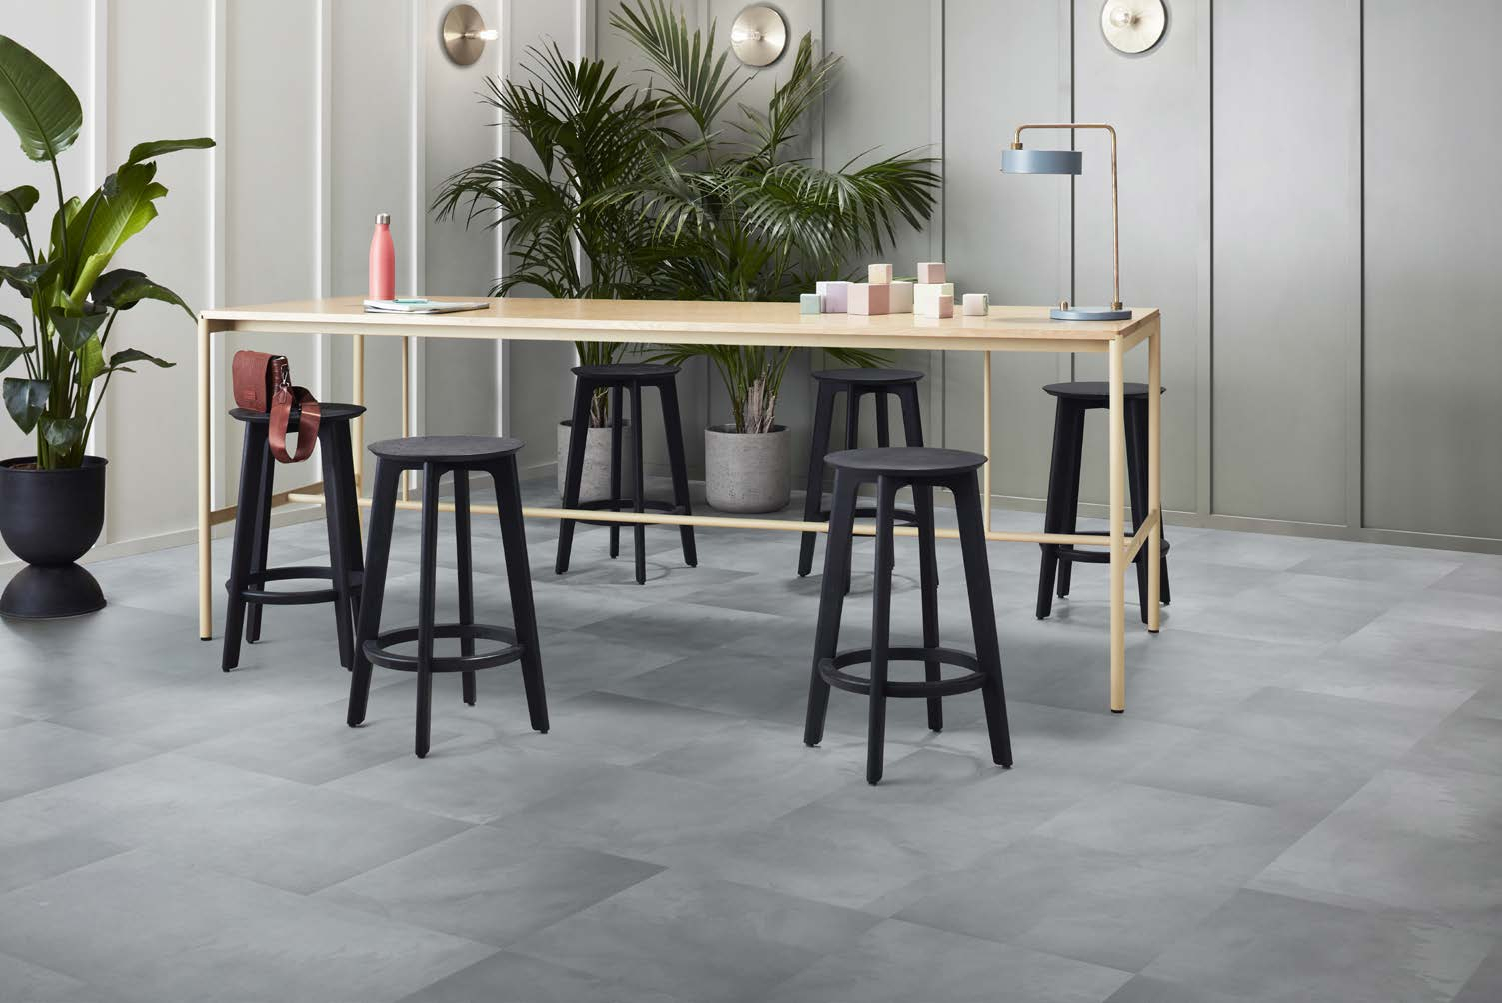 The new Iridescence LVT inspired by the use of mineral and organic pigments